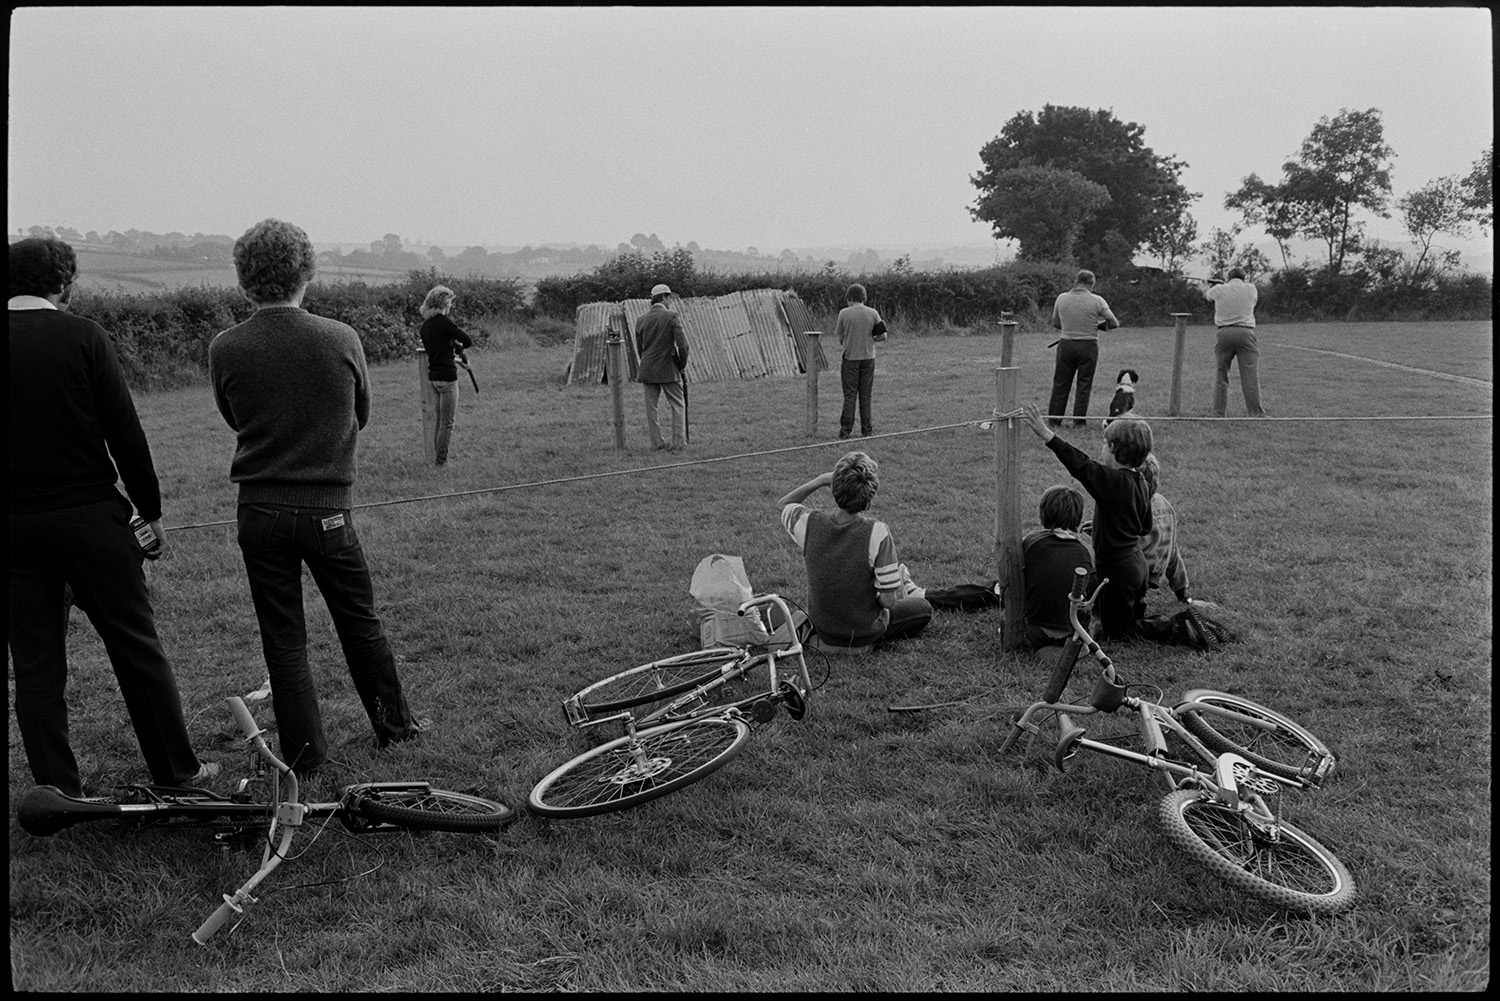 Flower show exhibits, jams, cups, sports, hot dog stall, bicycles, Clay Pigeon Shoot.
[Participants at the clay pigeon shoot at Dolton Flower Show. A group of boys are watching them behind a rope with bicycles lying on the ground.]